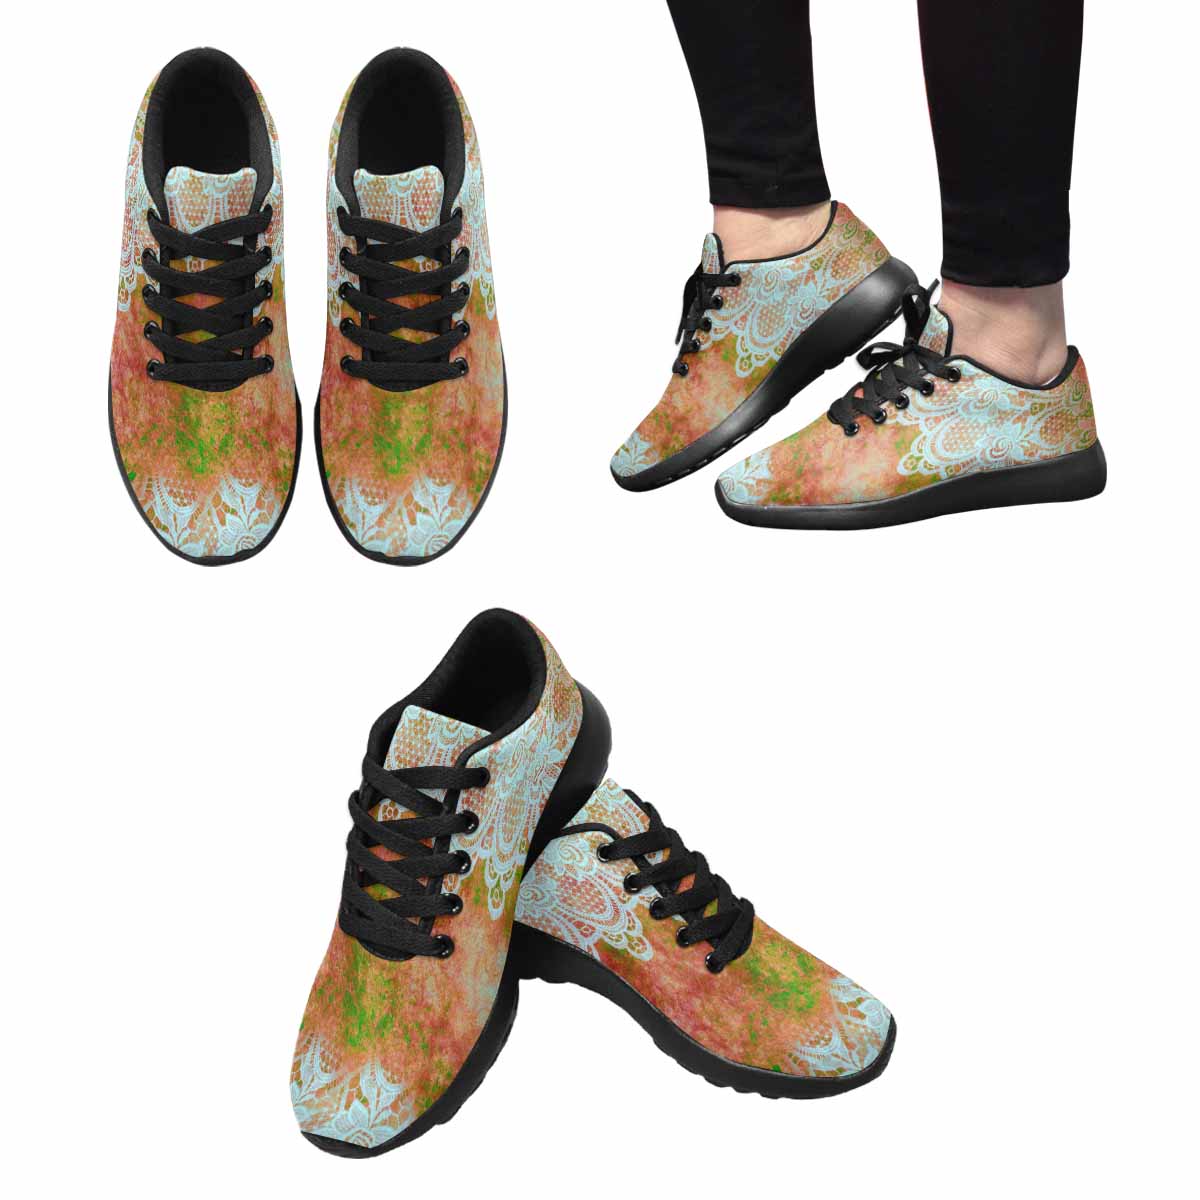 Victorian lace print, womens cute casual or running sneakers, design 31